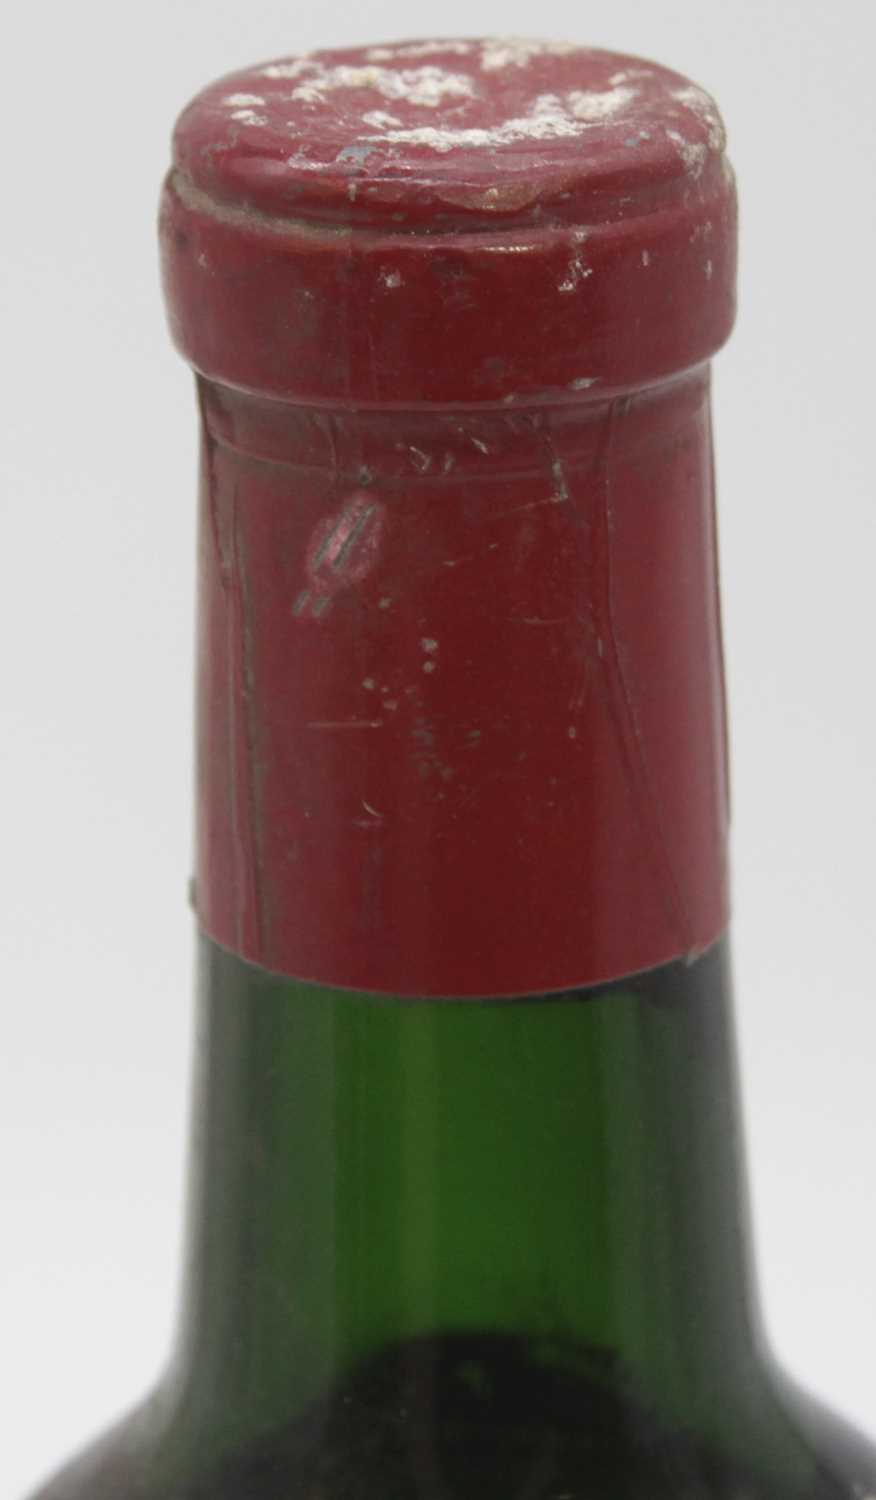 Château Giscours, 1964, Margaux, one bottle - Image 4 of 4